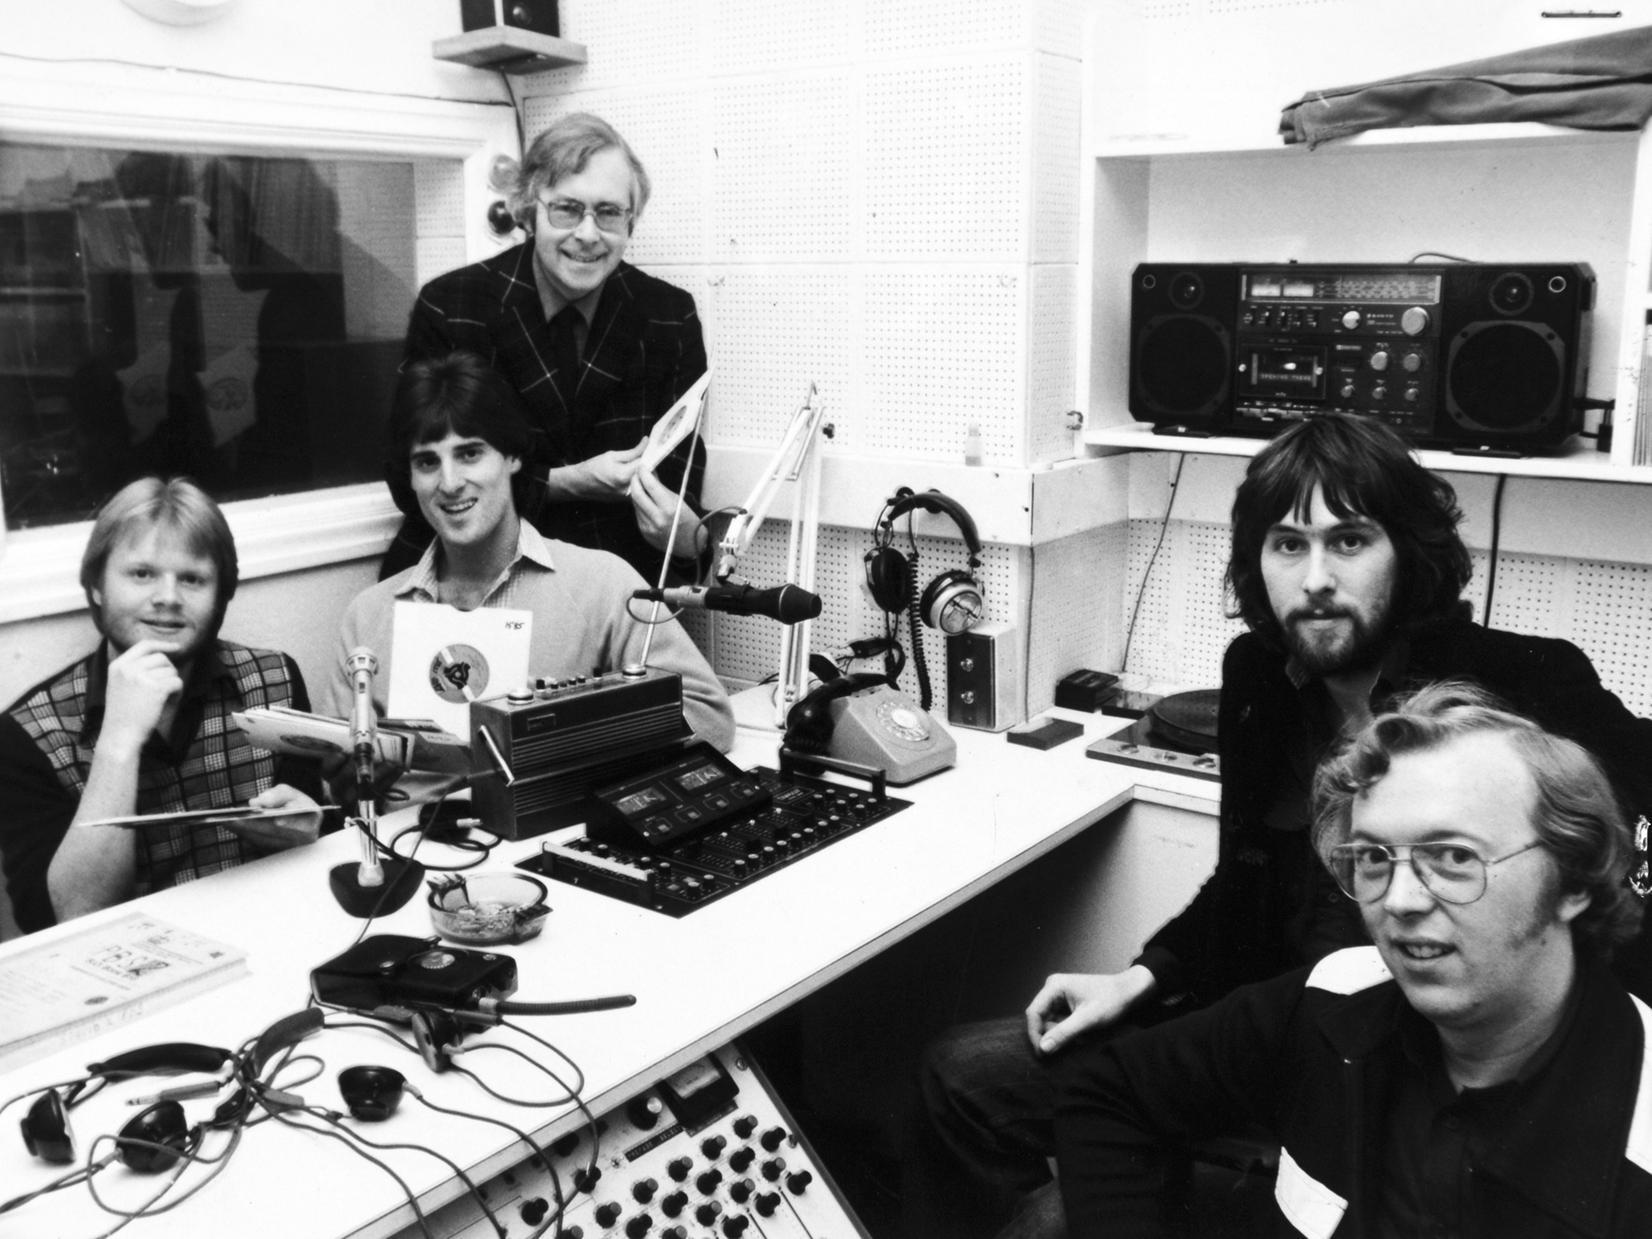 Radio PBS Leeds Infirmary's Hospital Broadcasting Service was back on the air after an eight month silence. Programme presenters, left to right, are Paul Cargill, Steve Hirst, Trevor Griffiths, Martin Croft and Alan Dee.